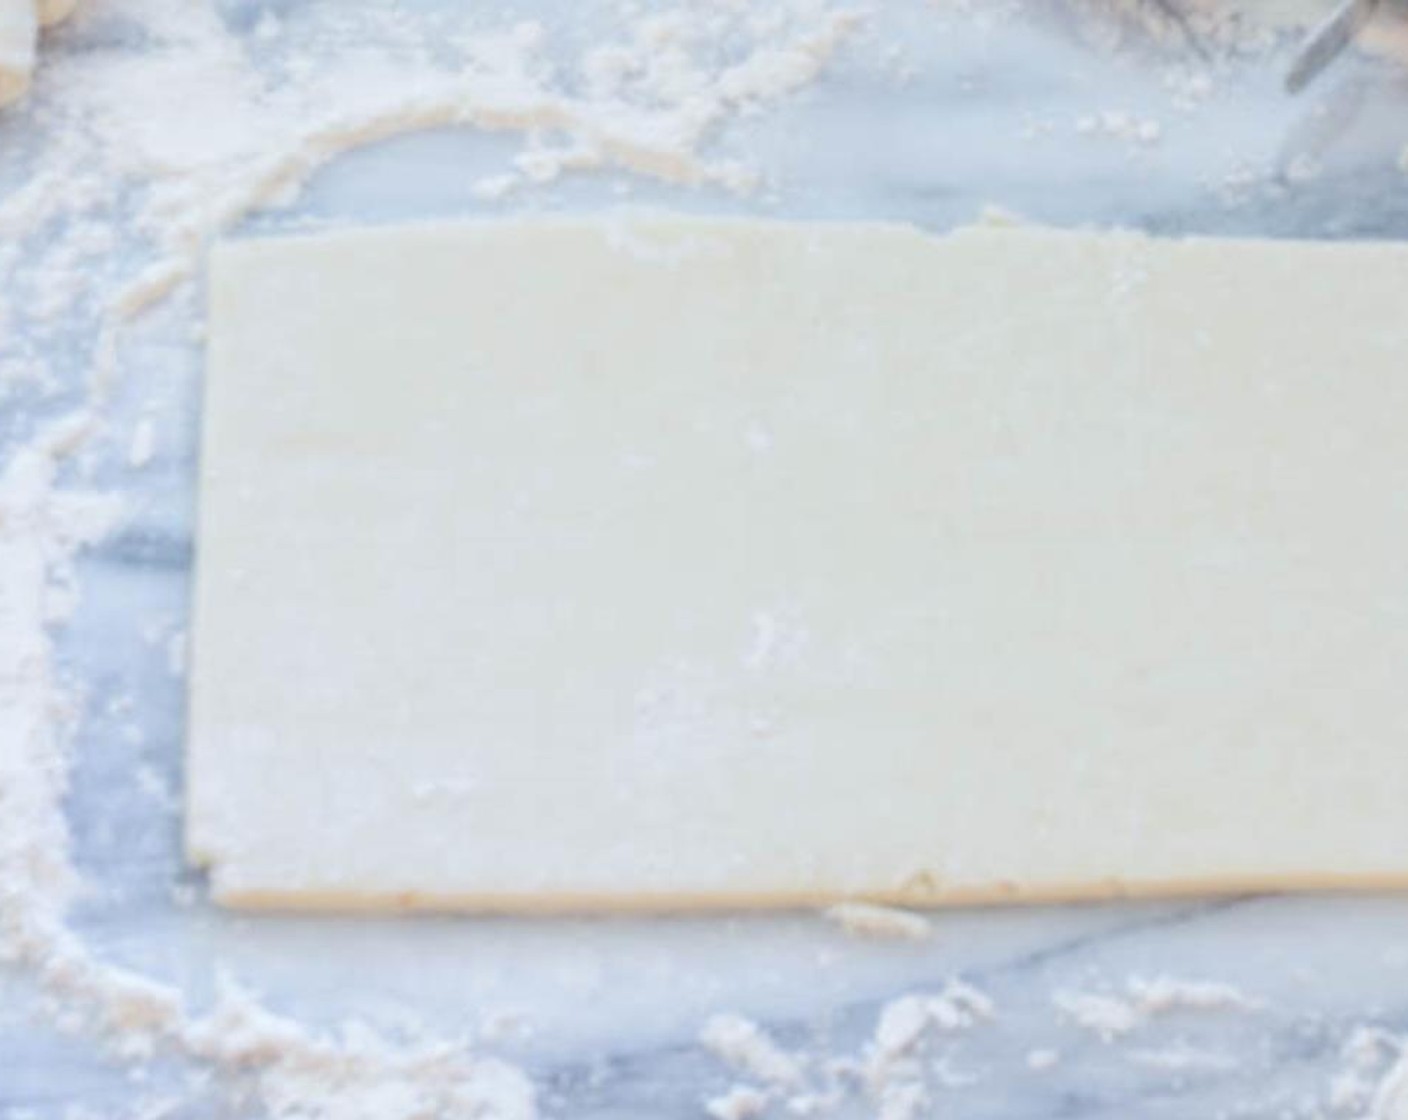 step 9 Generously flour your work surface. Working with one piece of chilled dough at a time, place the dough on the floured surface. Roll the dough into a rectangle about 12 x 5 inches. Use a pizza cutter to even up the sides and edges.